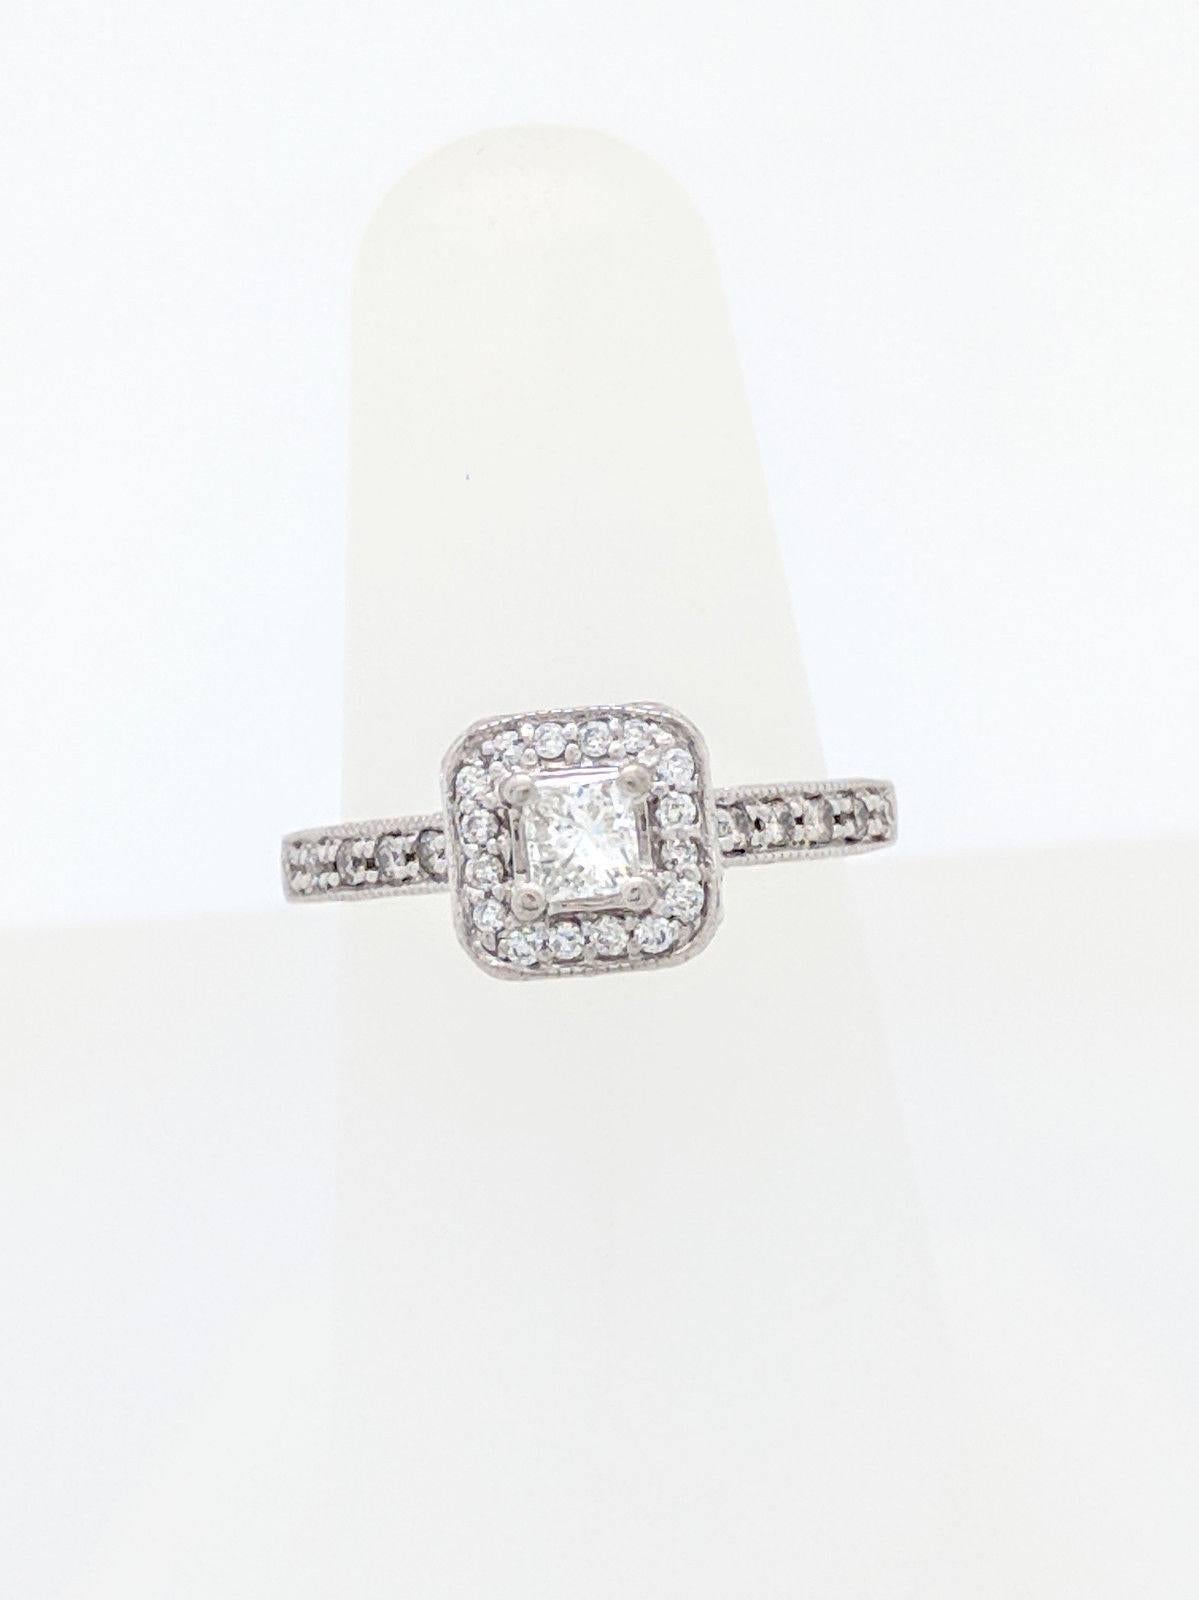 14K White Gold .24ct Princess Cut Diamond Halo Engagement Ring SI2/H Size 6

You are viewing a .24ct natural princess cut diamond set in a halo engagement ring. The center stone is beautifully displayed in a 14k white gold diamond halo engagement